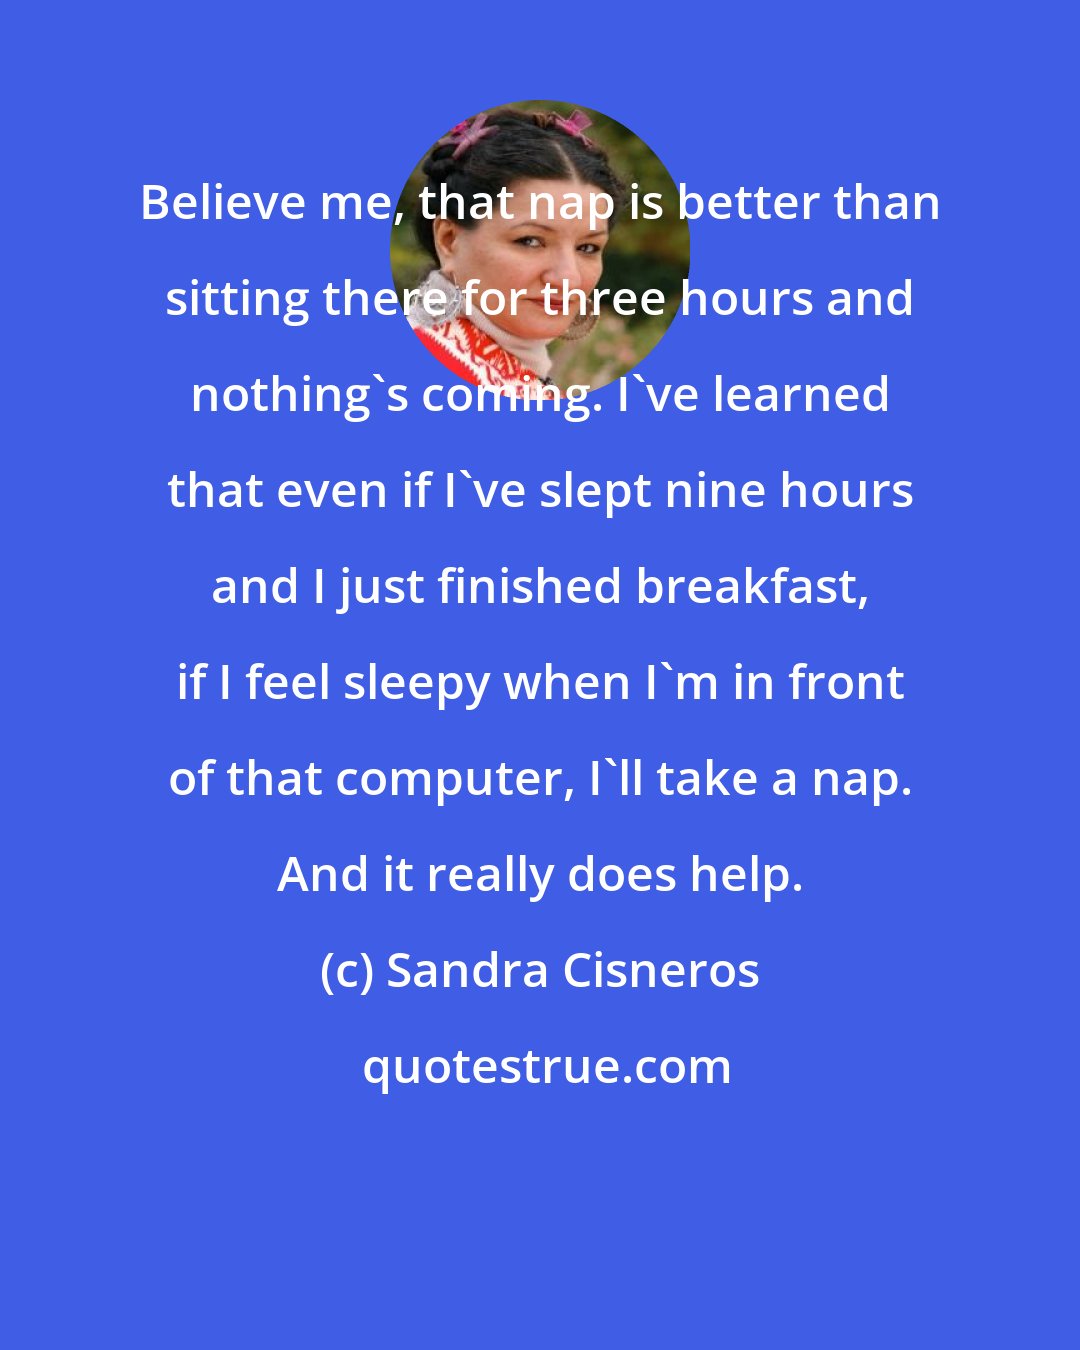 Sandra Cisneros: Believe me, that nap is better than sitting there for three hours and nothing's coming. I've learned that even if I've slept nine hours and I just finished breakfast, if I feel sleepy when I'm in front of that computer, I'll take a nap. And it really does help.